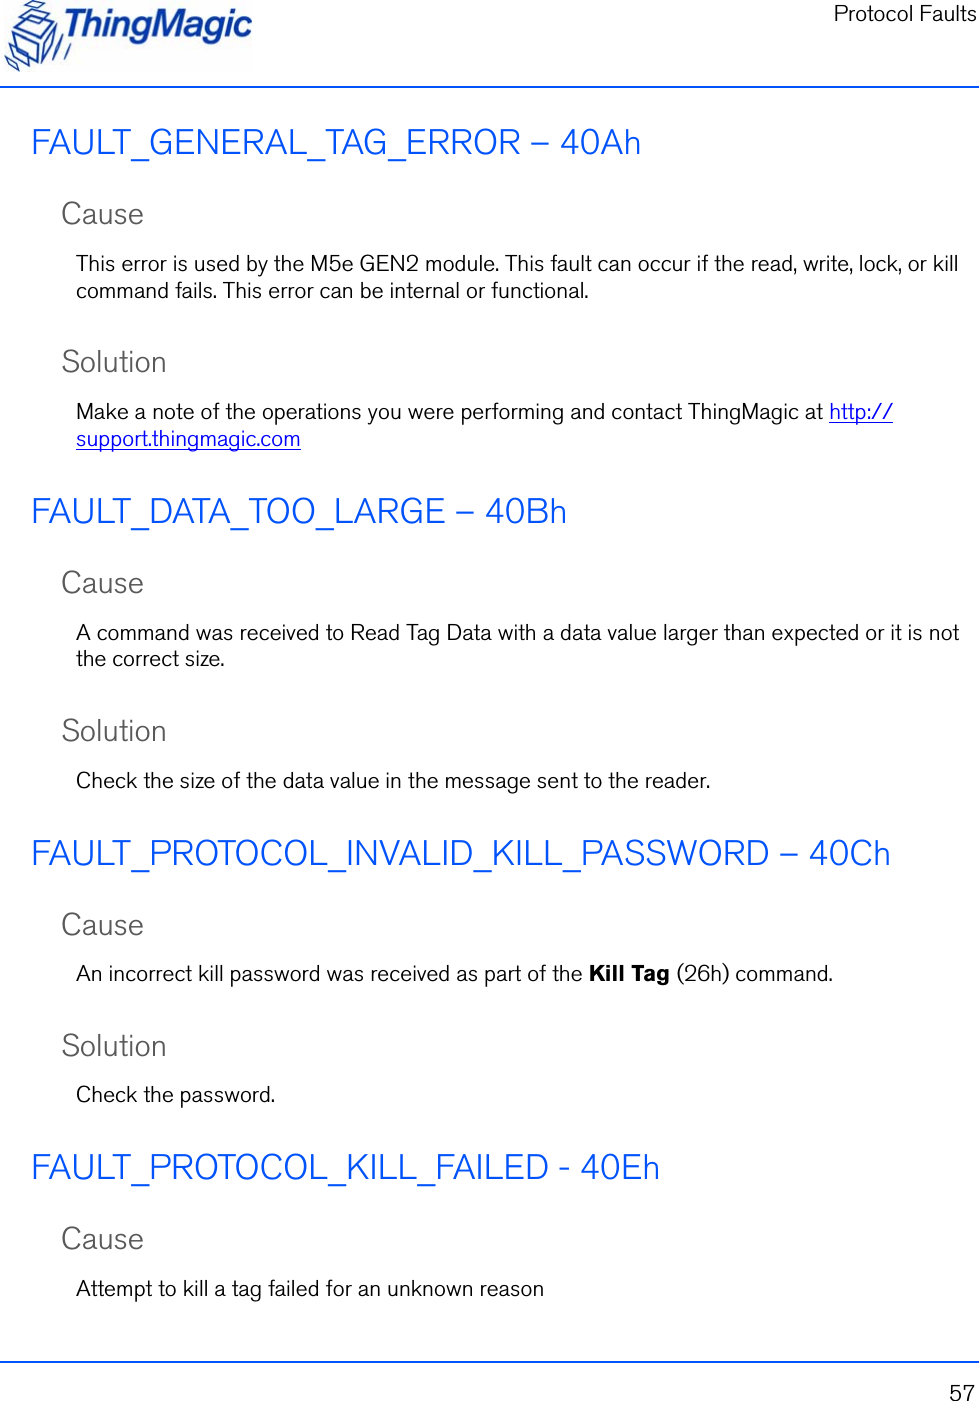 Protocol Faults57FAULT_GENERAL_TAG_ERROR – 40AhCauseThis error is used by the M5e GEN2 module. This fault can occur if the read, write, lock, or kill command fails. This error can be internal or functional.SolutionMake a note of the operations you were performing and contact ThingMagic at http://support.thingmagic.comFAULT_DATA_TOO_LARGE – 40BhCauseA command was received to Read Tag Data with a data value larger than expected or it is not the correct size.SolutionCheck the size of the data value in the message sent to the reader.FAULT_PROTOCOL_INVALID_KILL_PASSWORD – 40ChCauseAn incorrect kill password was received as part of the Kill Tag (26h) command. SolutionCheck the password.FAULT_PROTOCOL_KILL_FAILED - 40EhCauseAttempt to kill a tag failed for an unknown reason